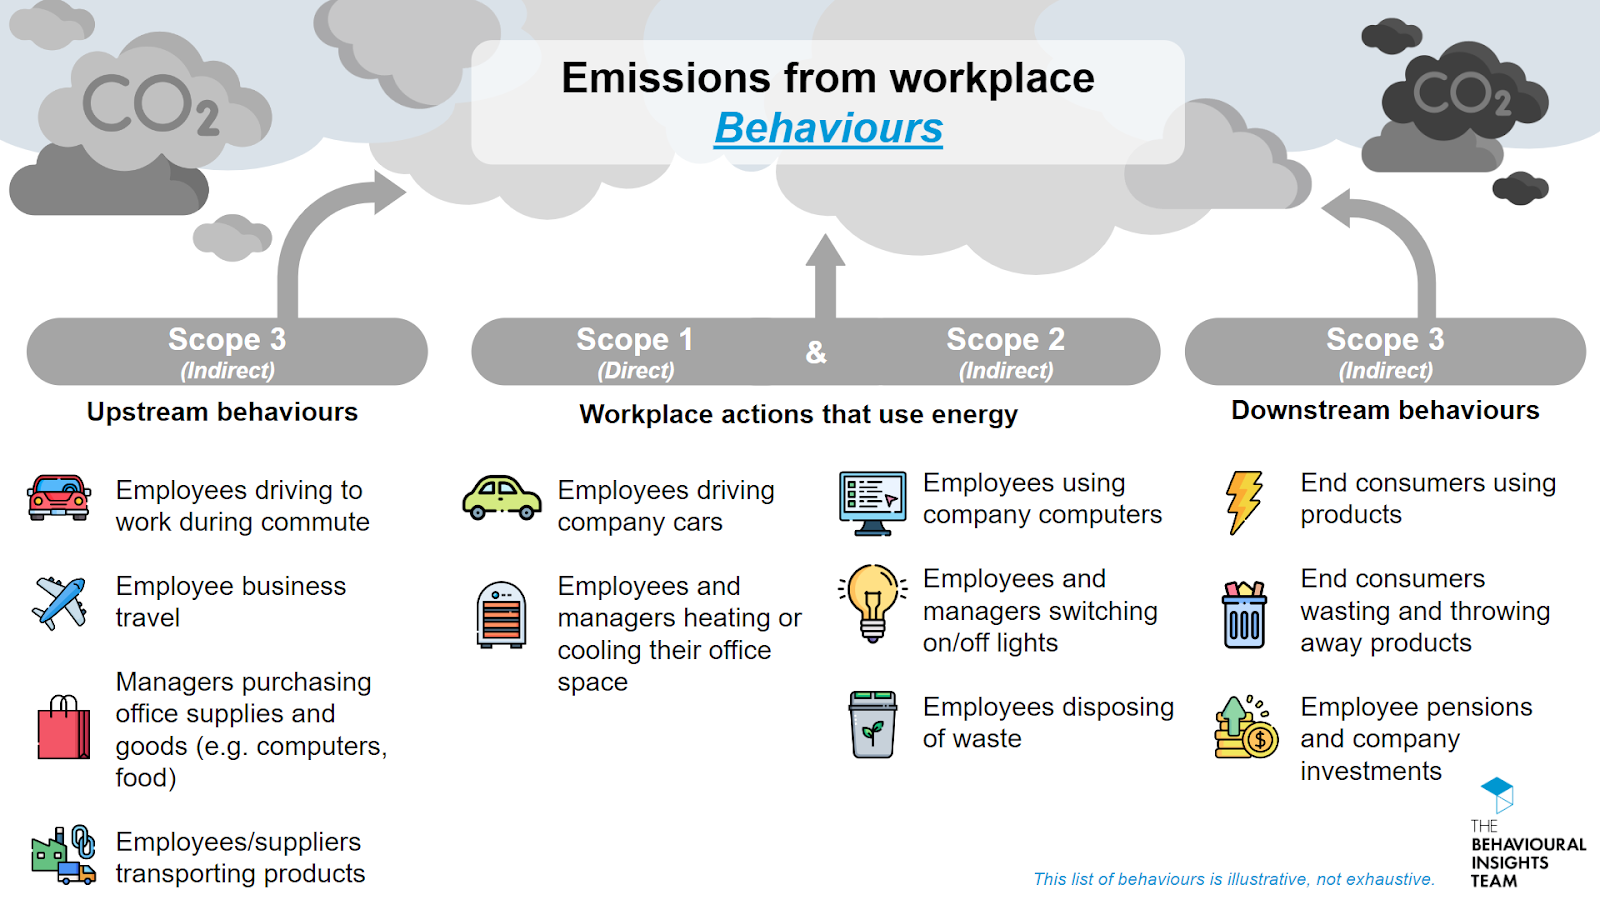 How can behavioural insights help save energy in the workplace? | The Behavioural Insights Team